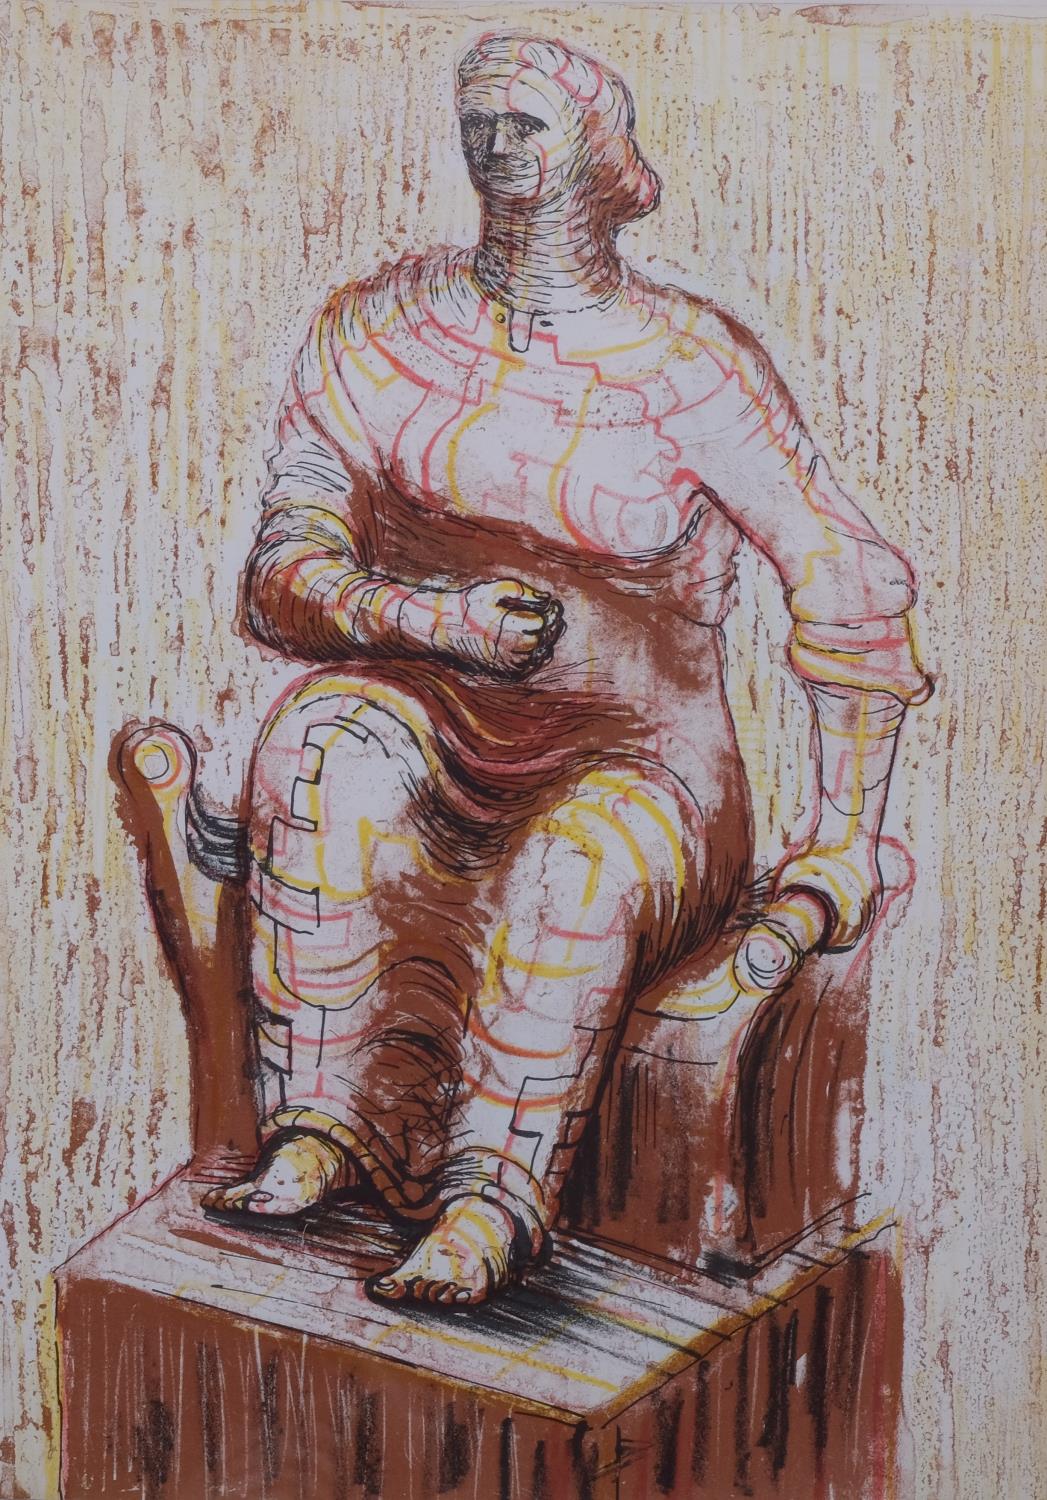 Henry Moore, seated figure, 1950, plastic plate specimen printing, lithograph by WS Cowell, image